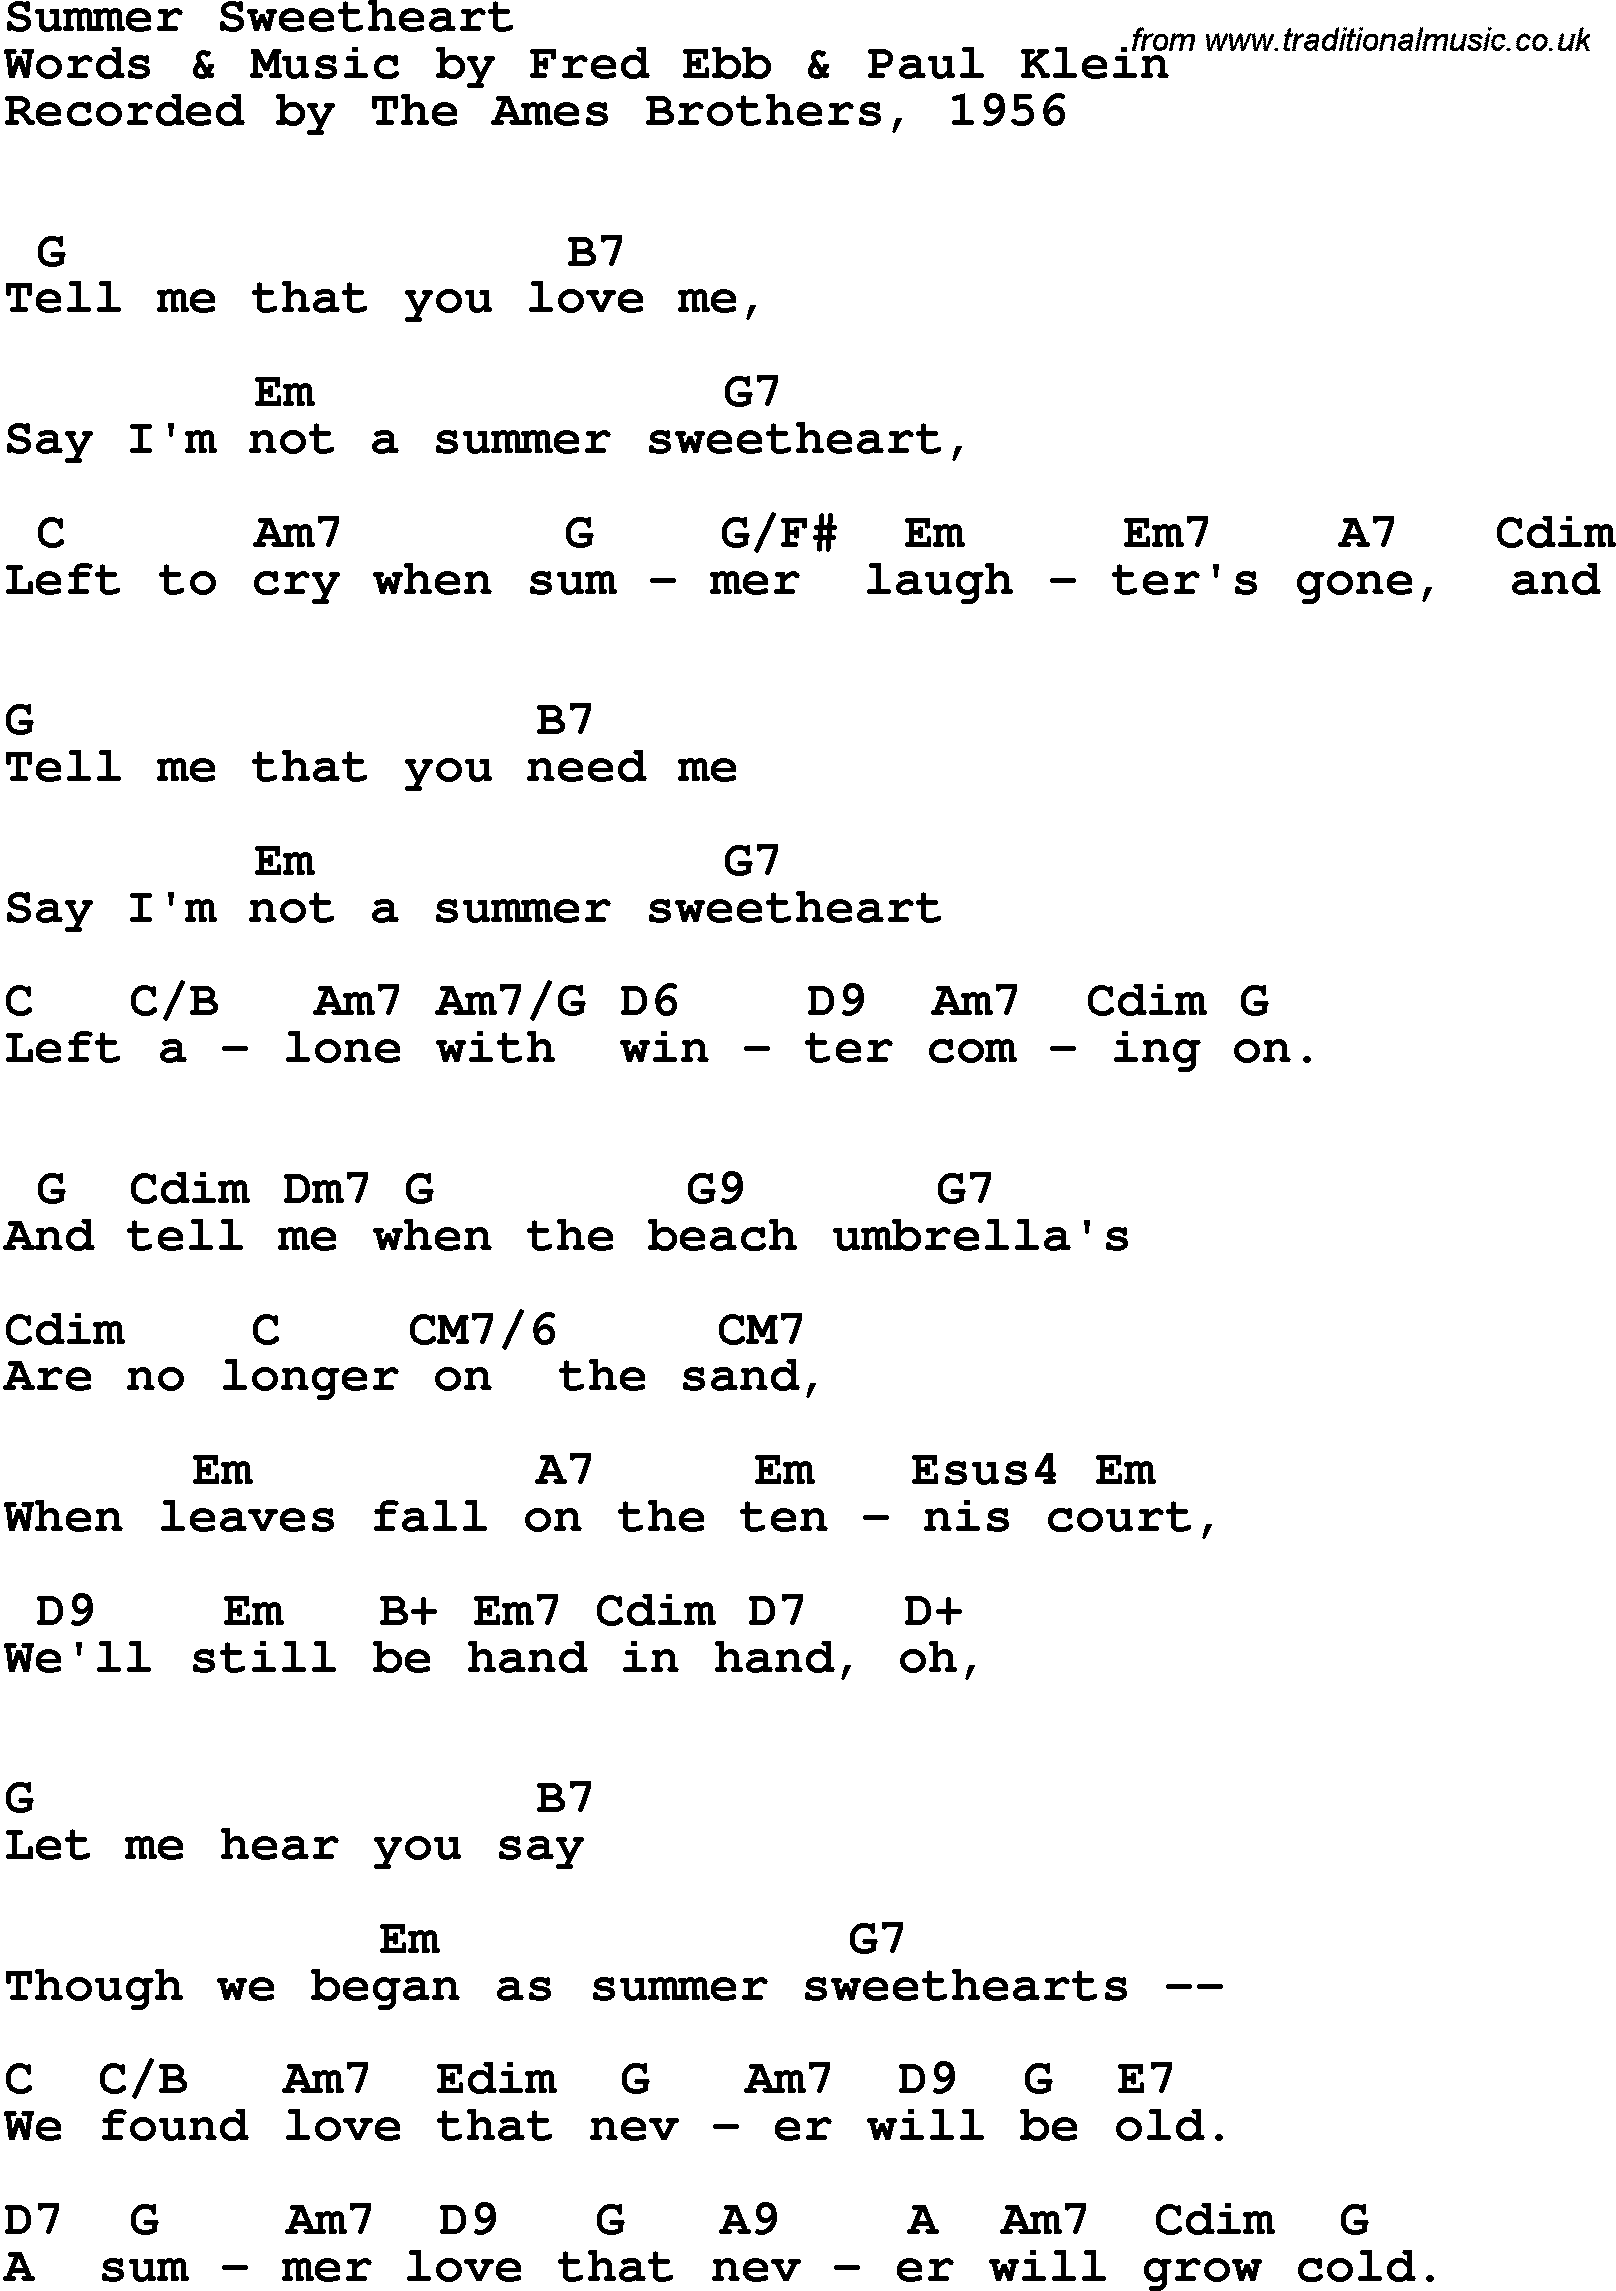 Song Lyrics with guitar chords for Summer Sweetheart - The Ames Brothers, 1956